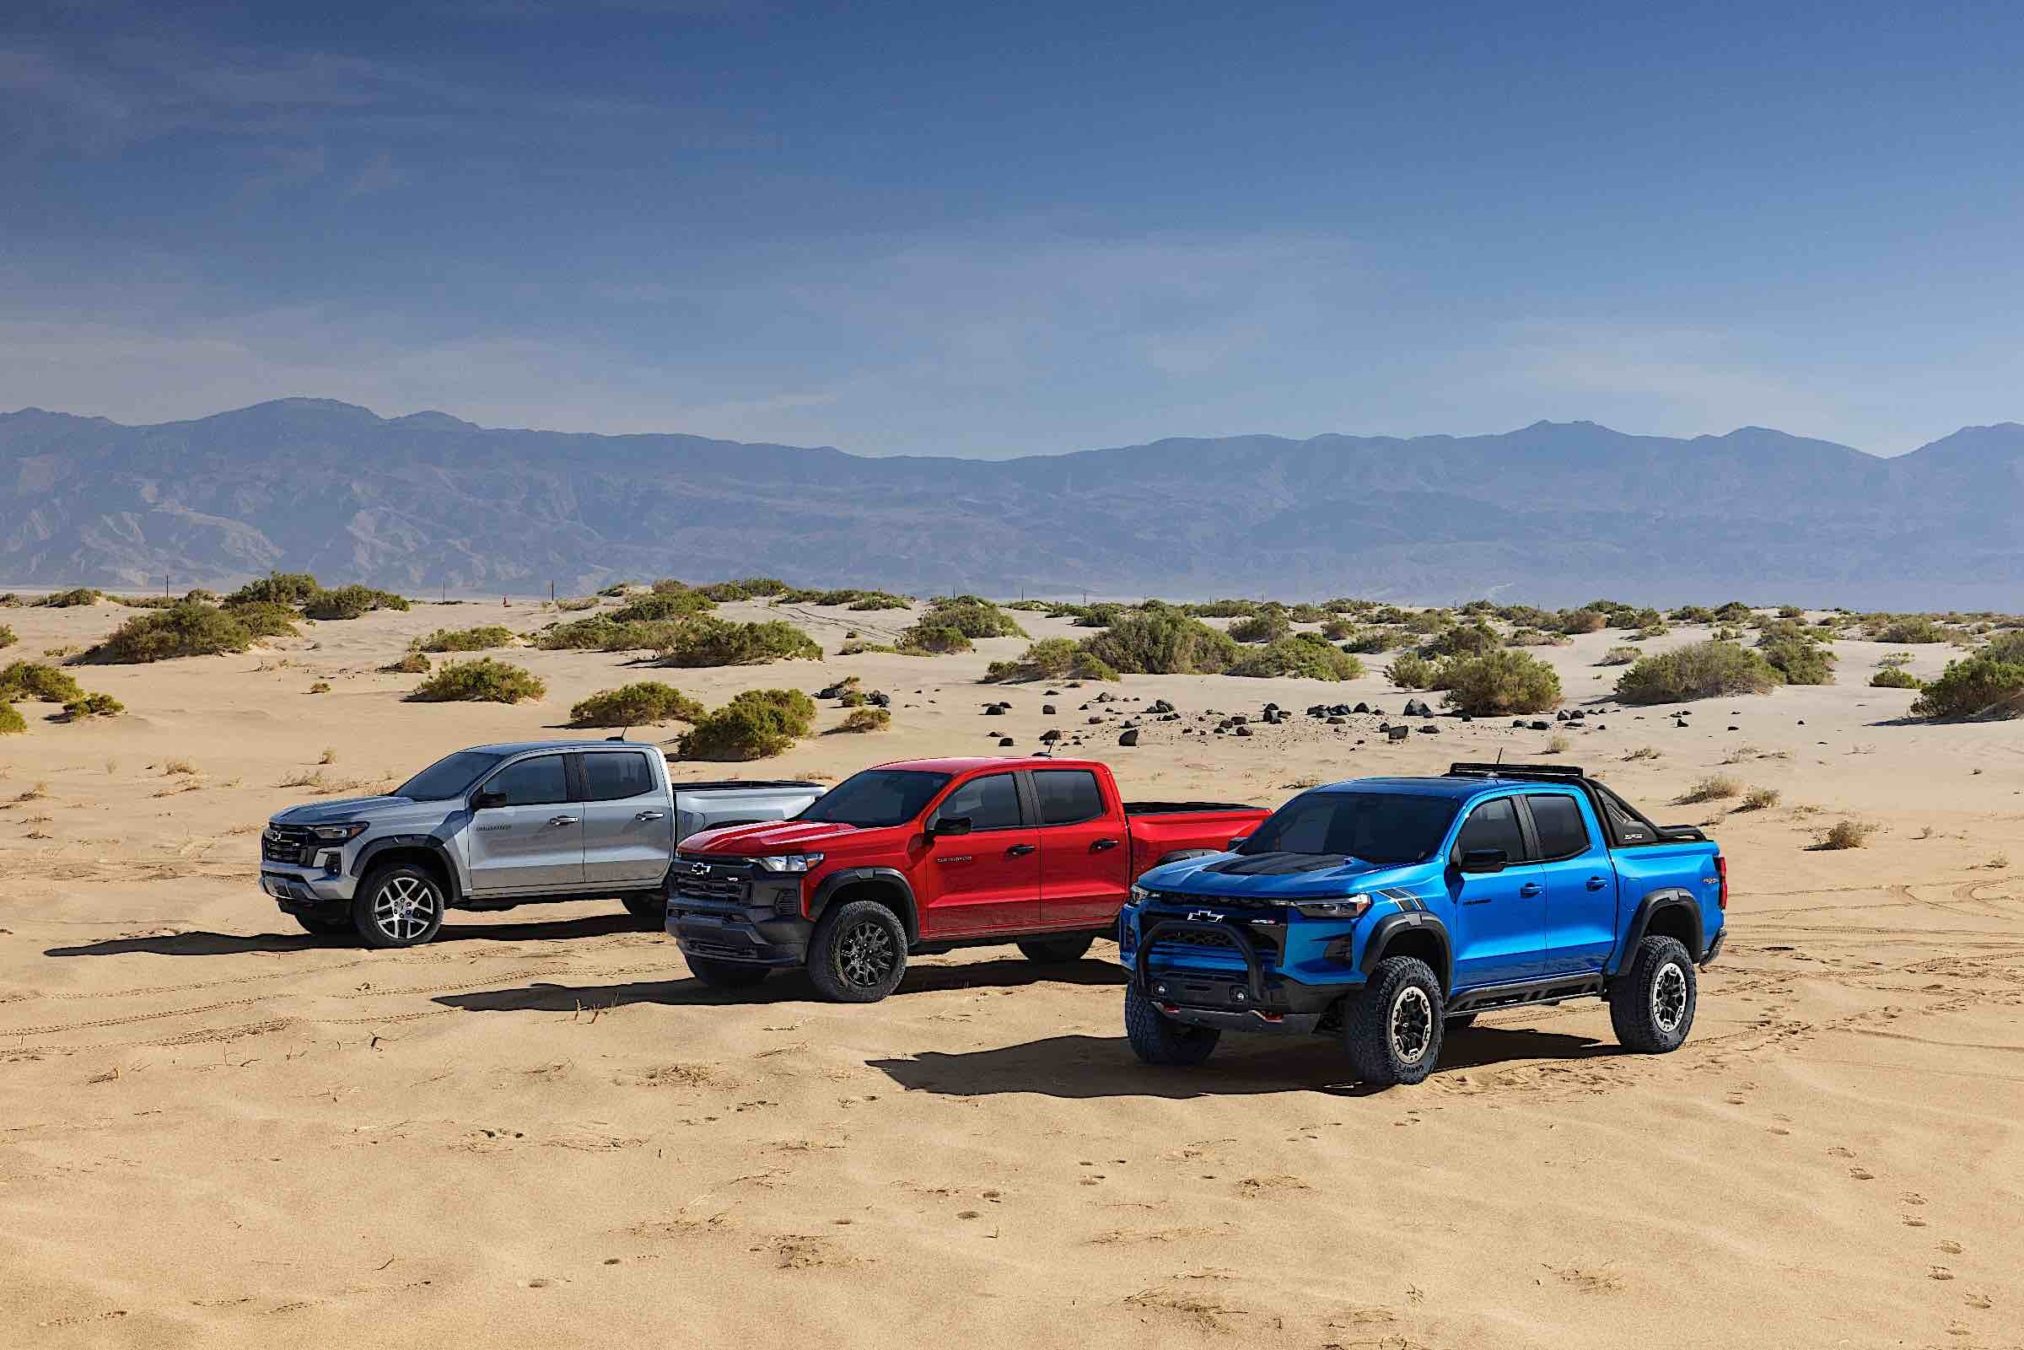 Three 2023 Chevrolet Colorado parked in the desert.